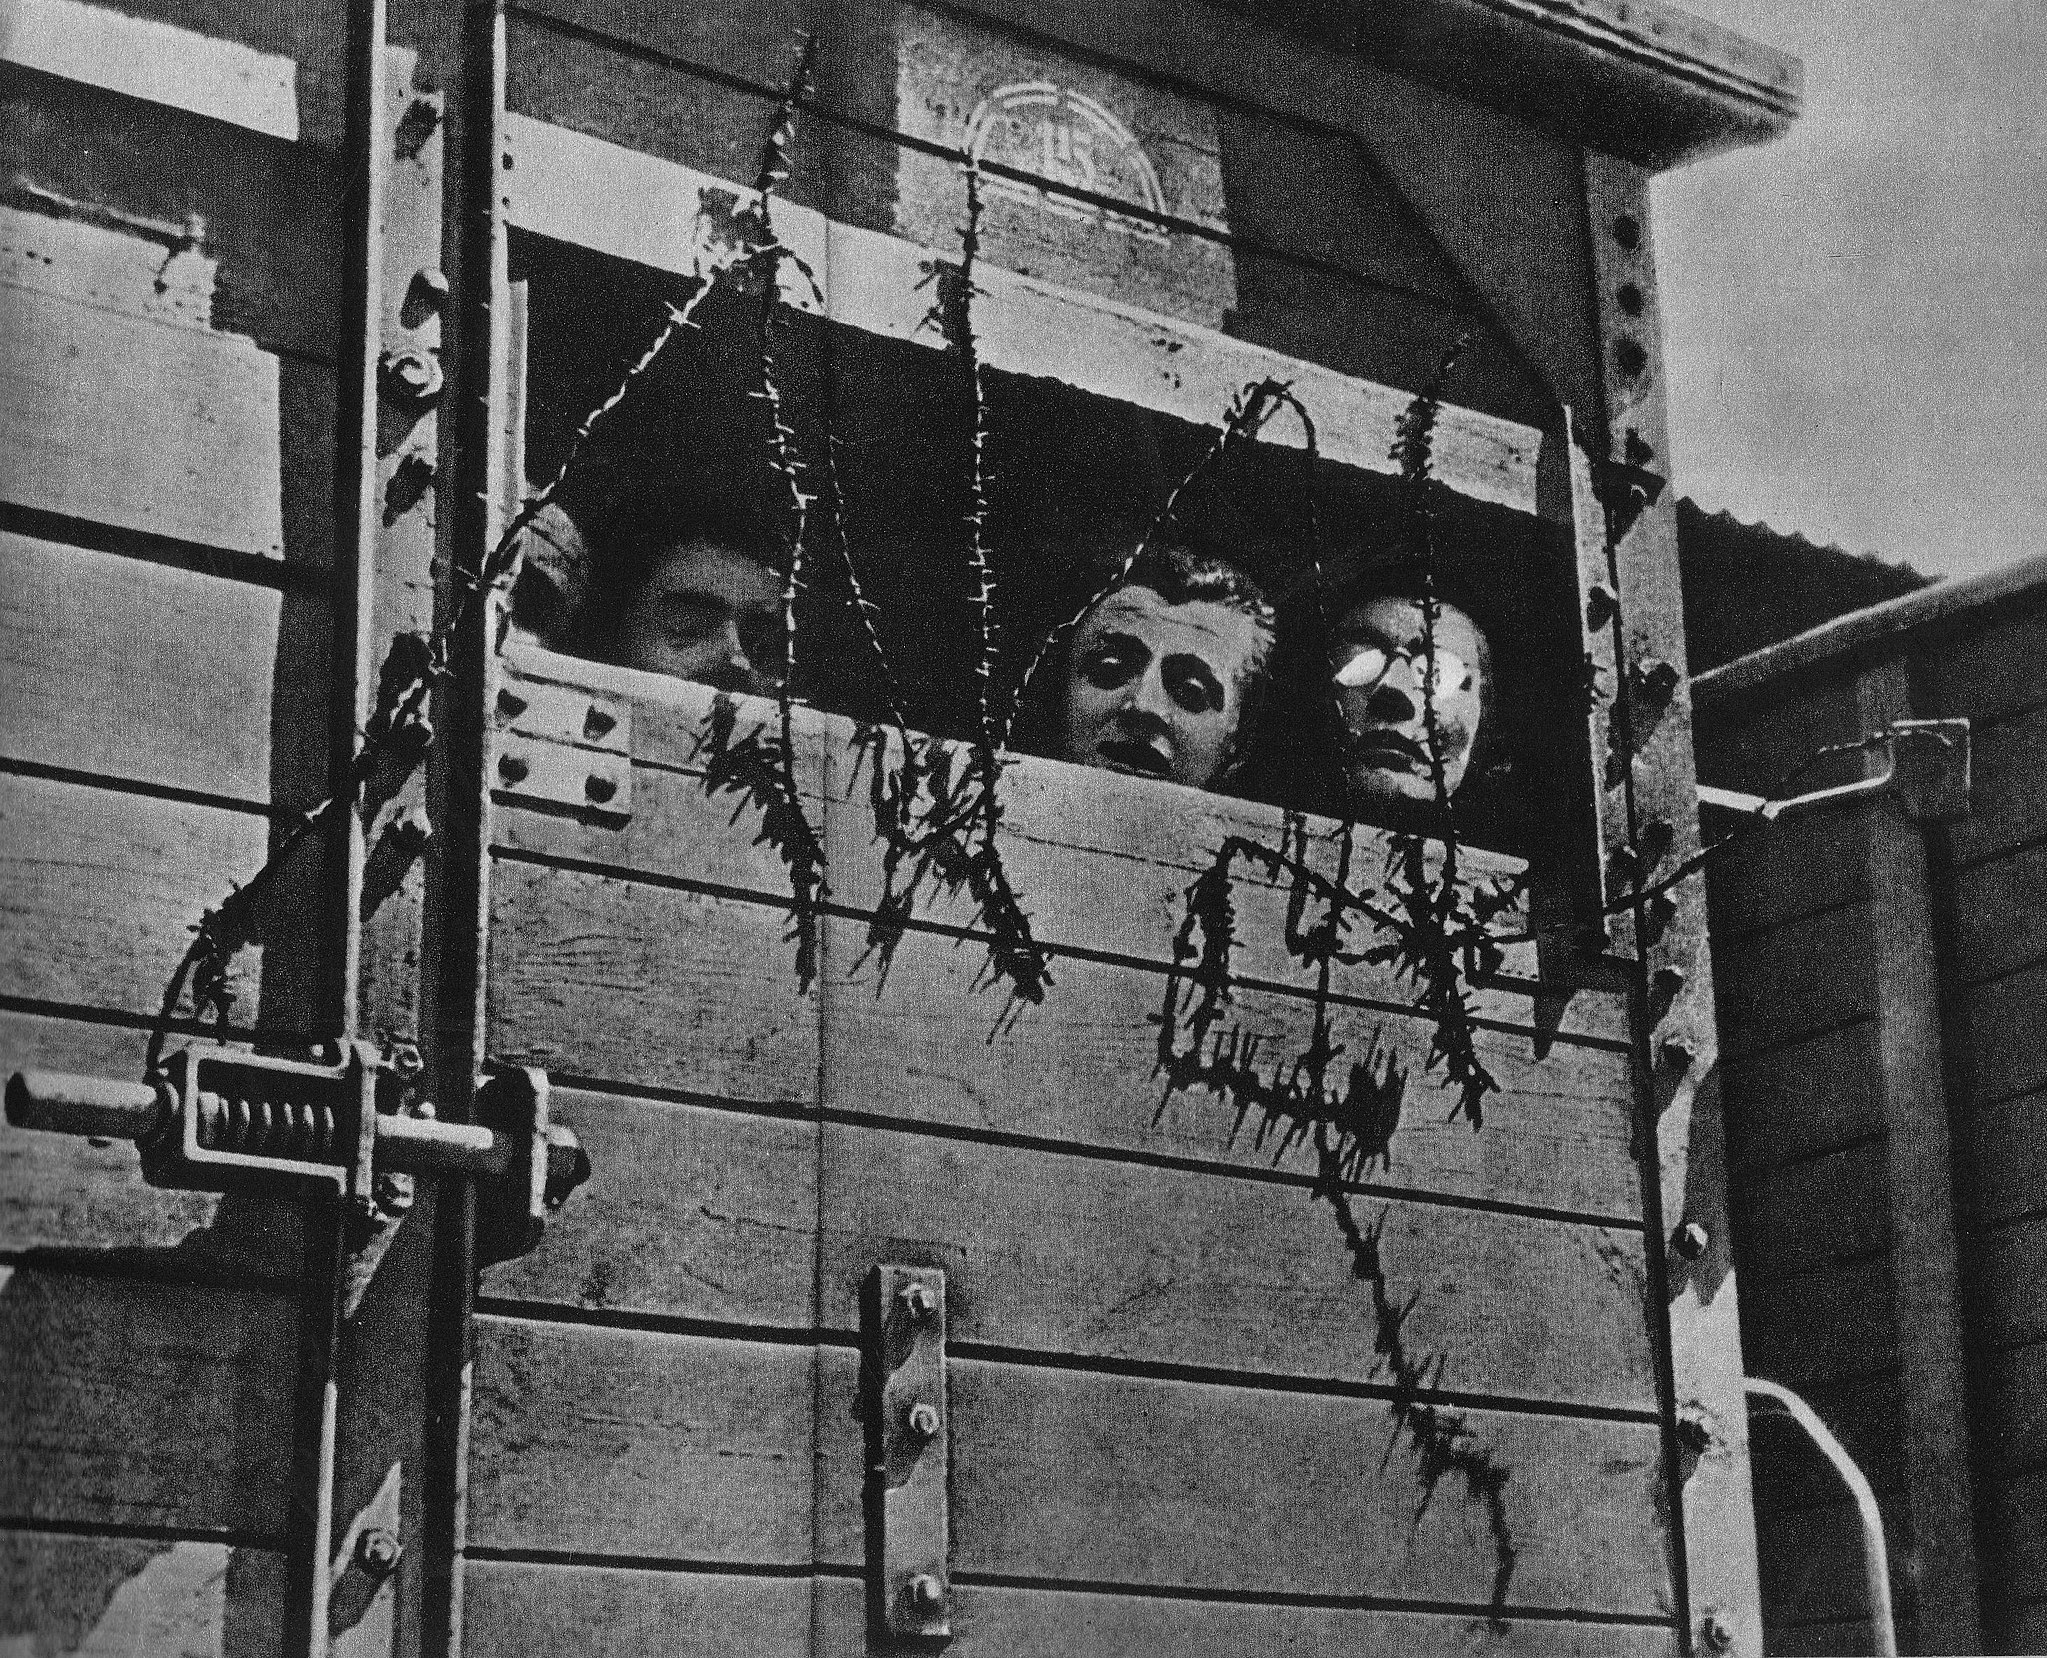 Polish Jews travel in a railway car to a death camp during World War II. Place and date unknown, via WikiCommons.